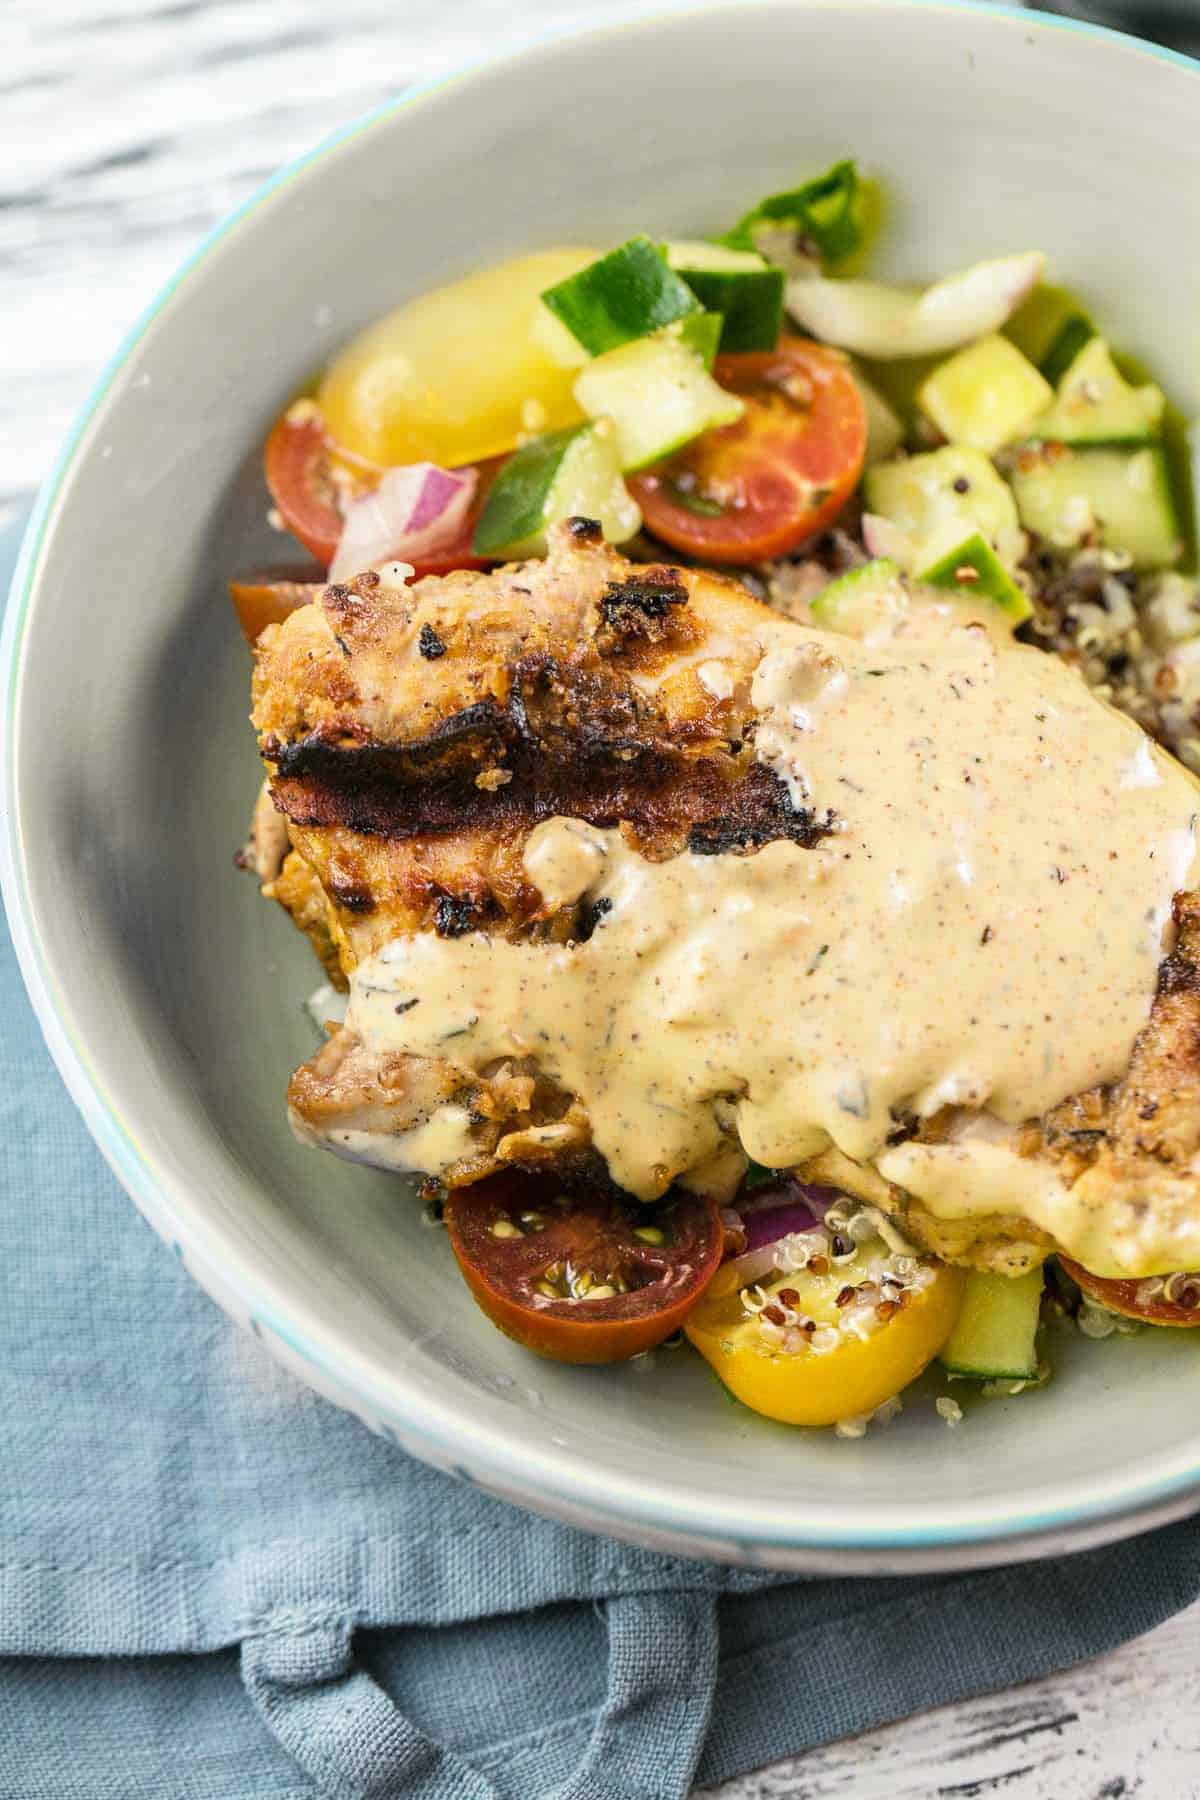 grilled chicken with tahini sauce and salad in a ceramic bowl